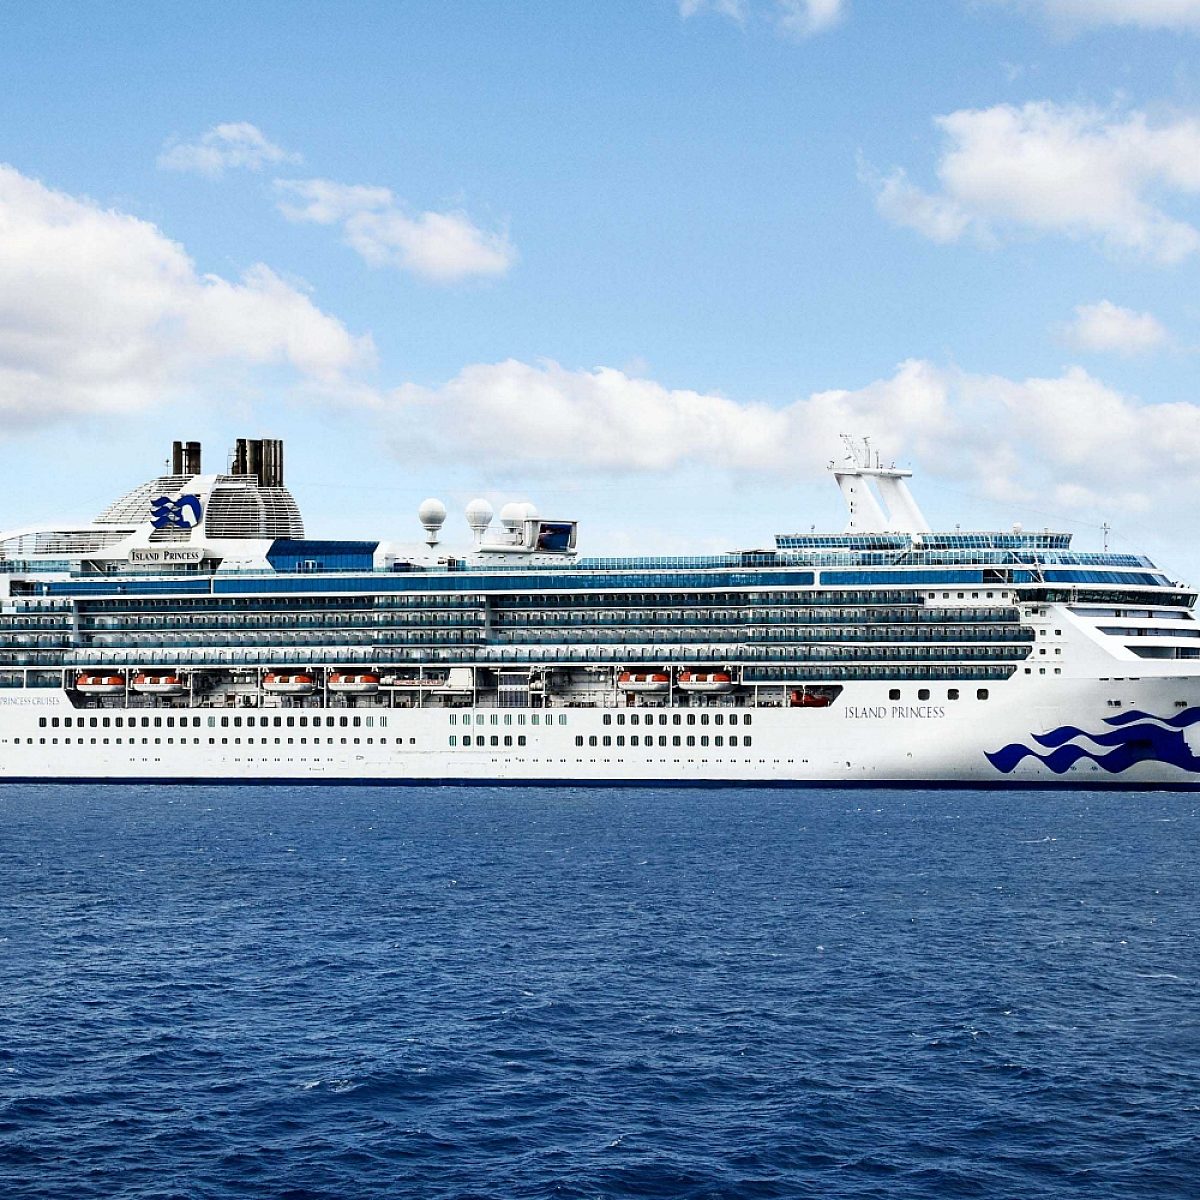 The new Island Princess arrives in the UK this year | Journey Magazine